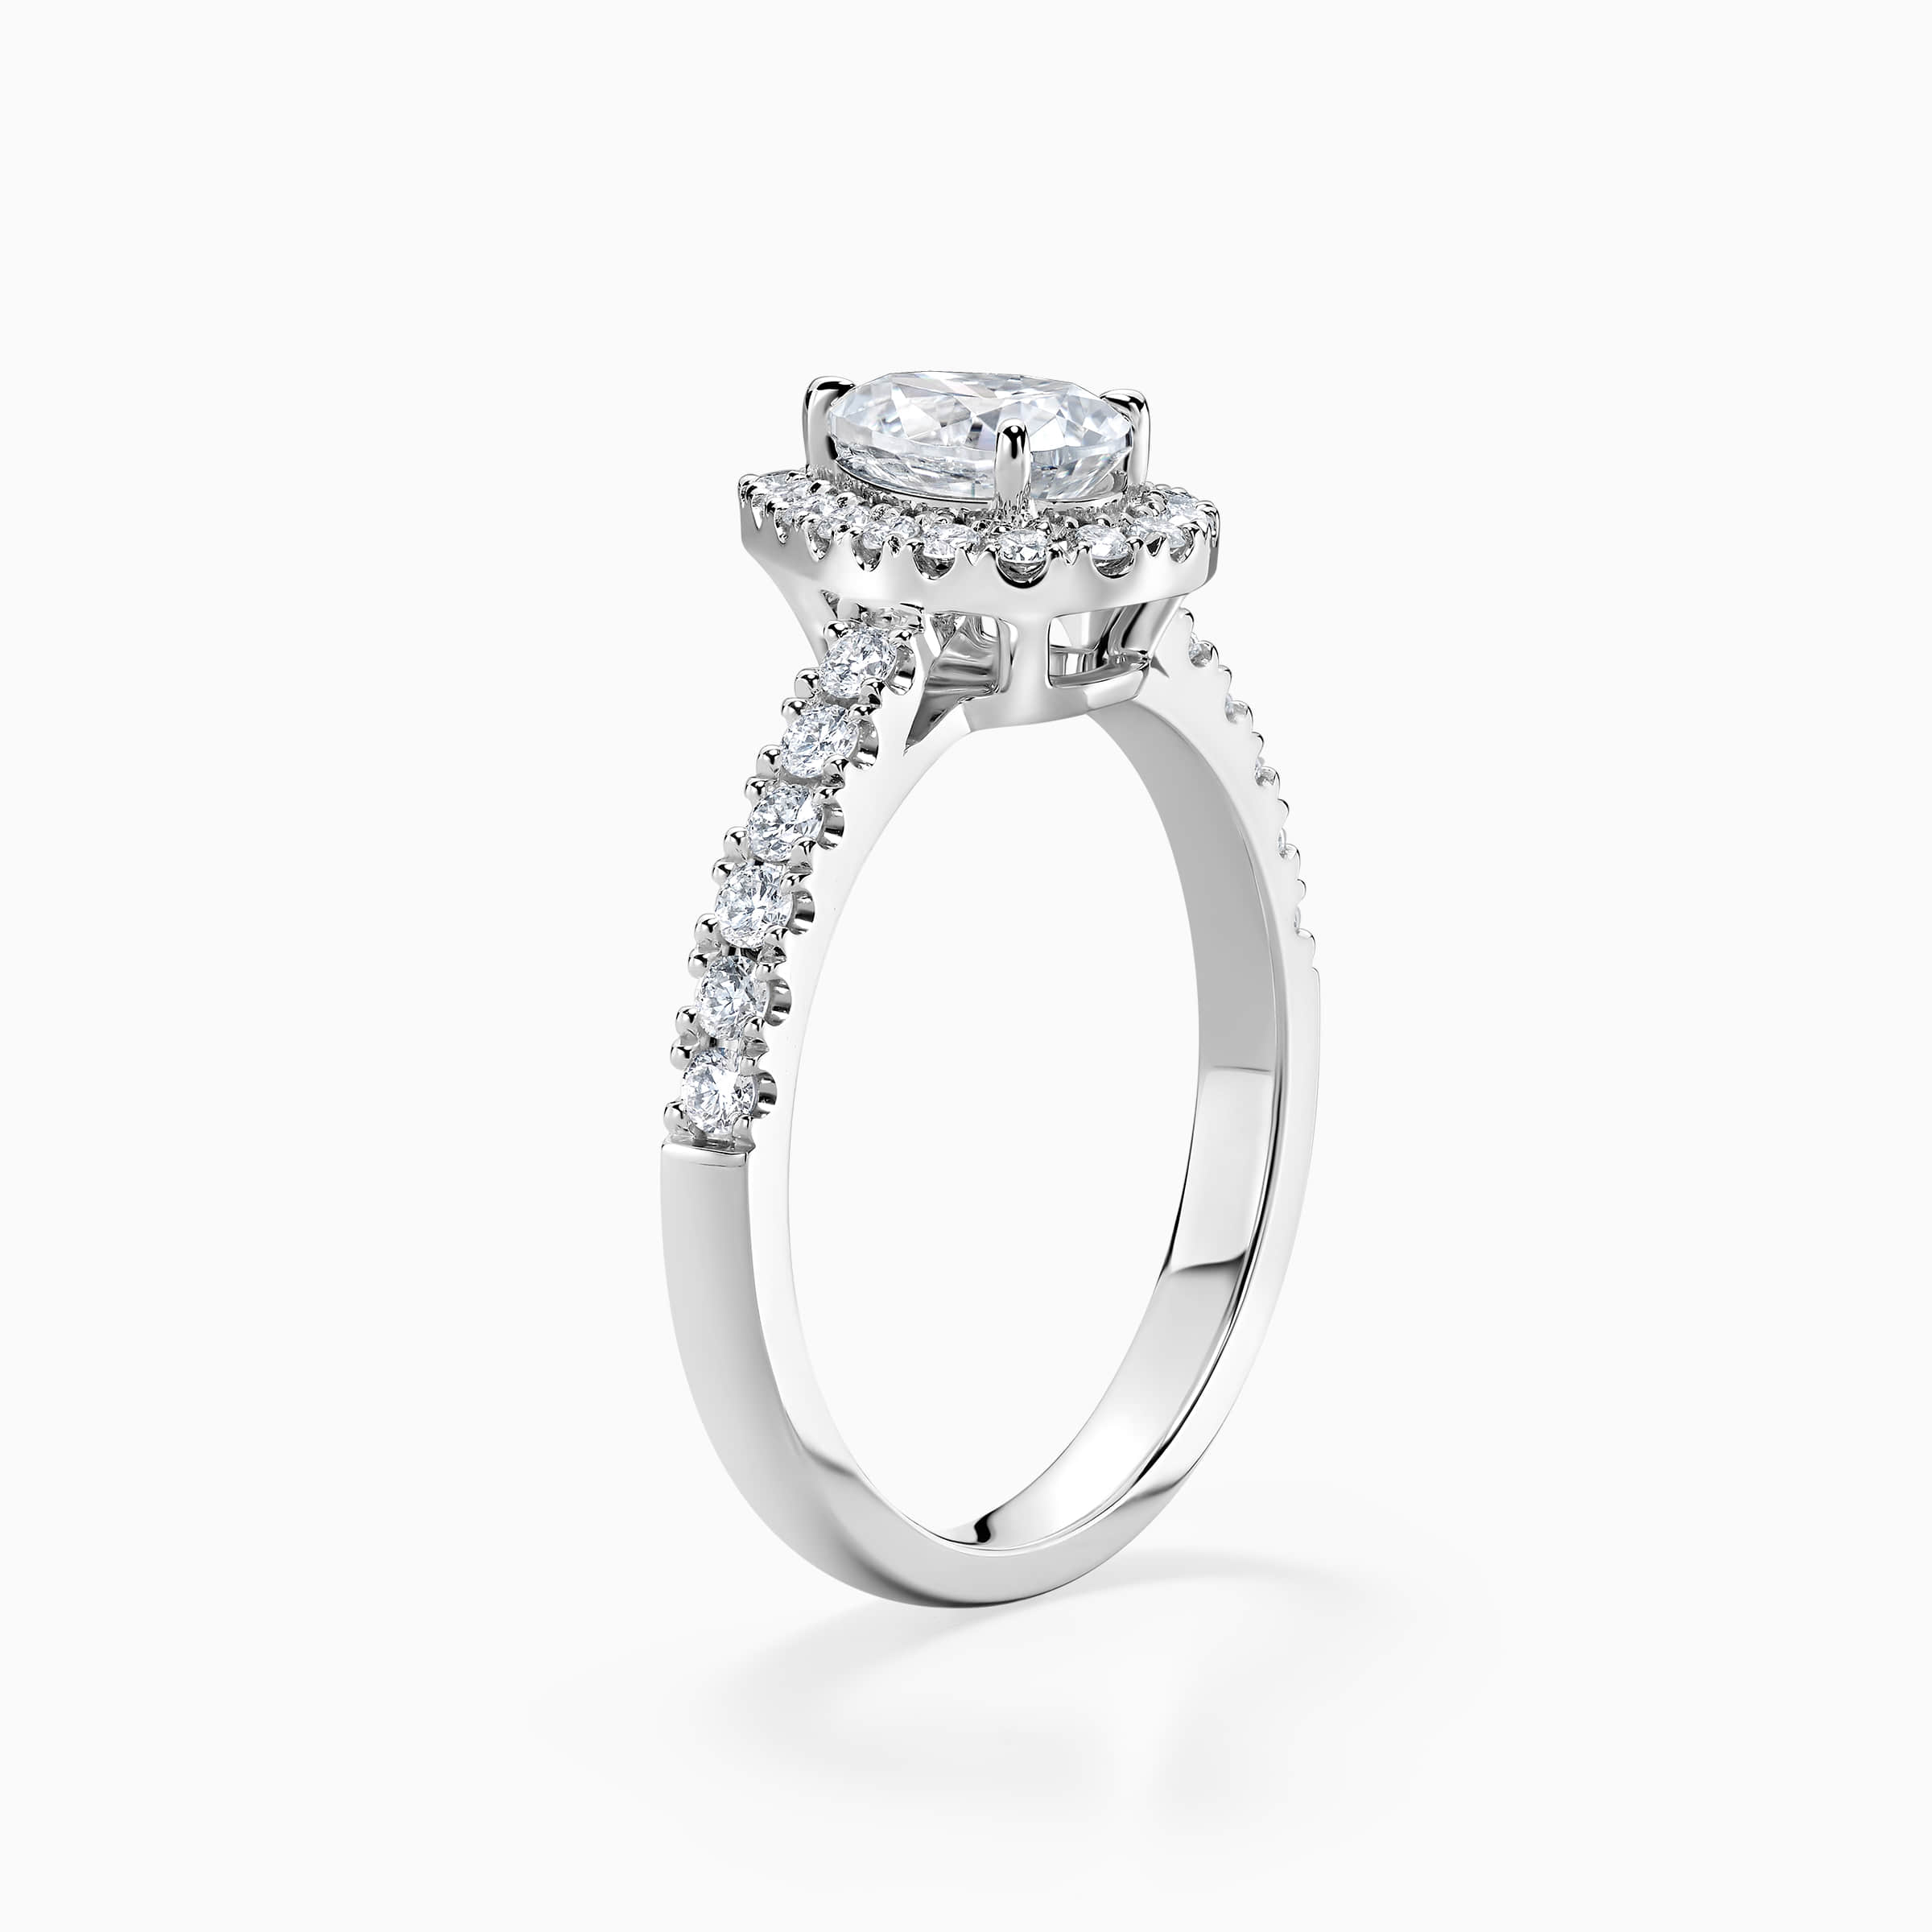 Darry Ring teardrop engagement ring side view